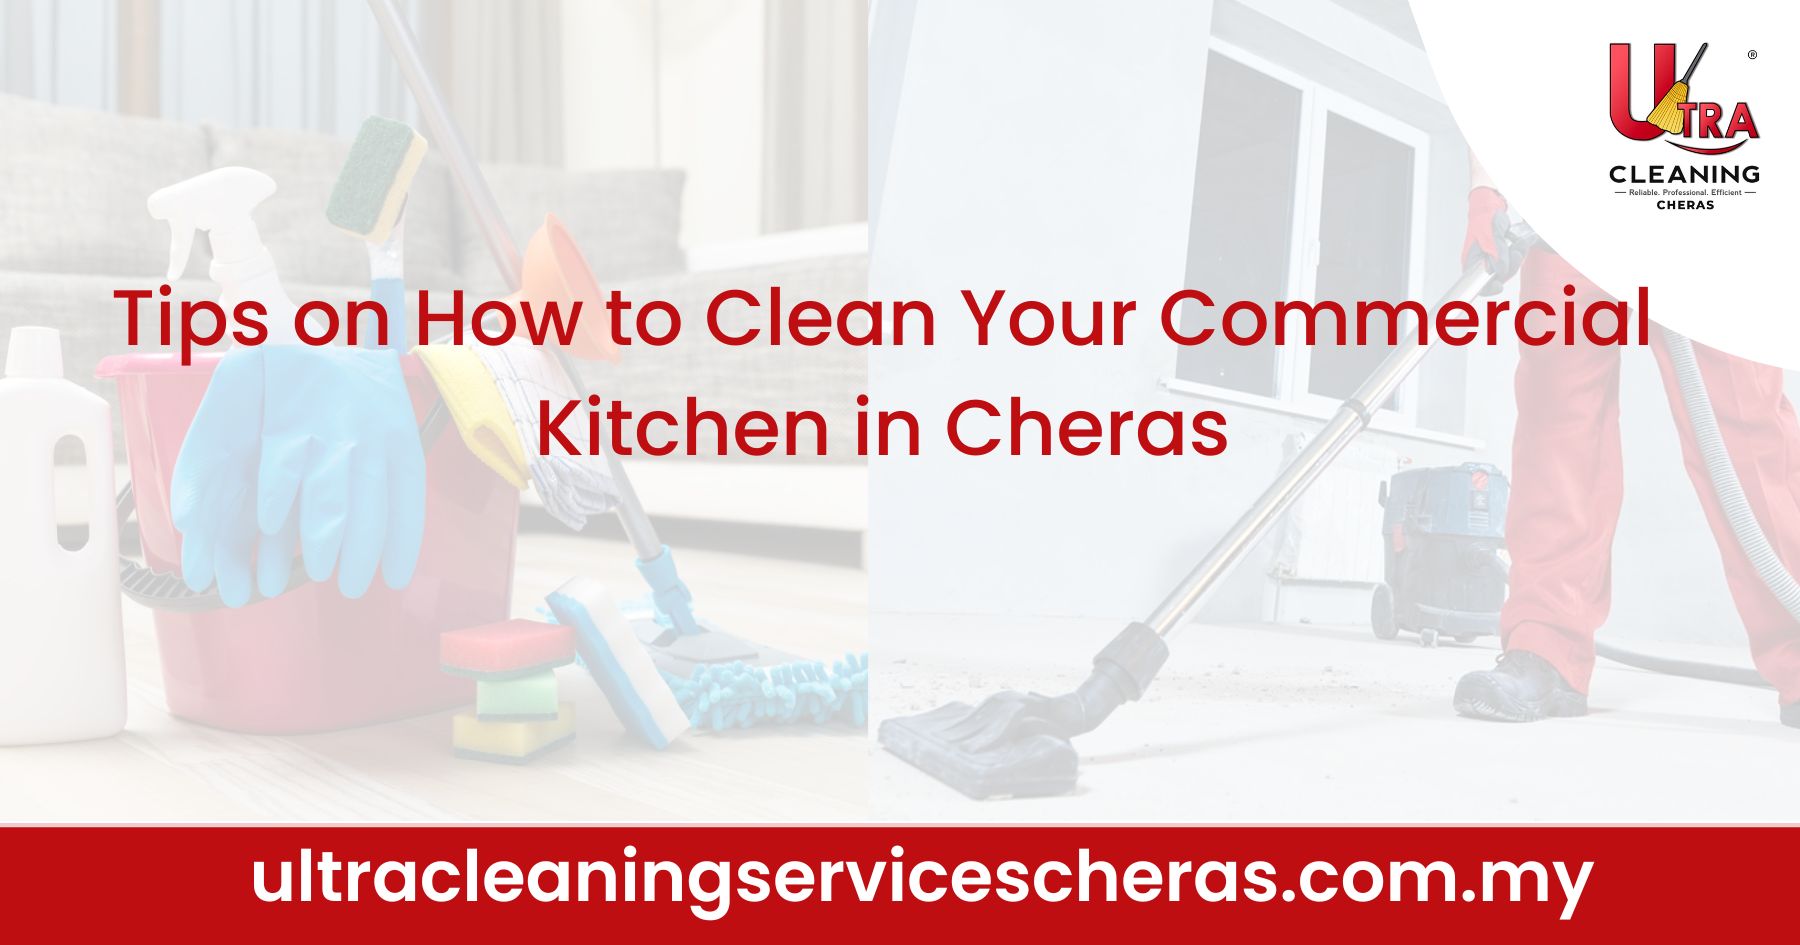 Tips on How to Clean Your Commercial Kitchen in Cheras